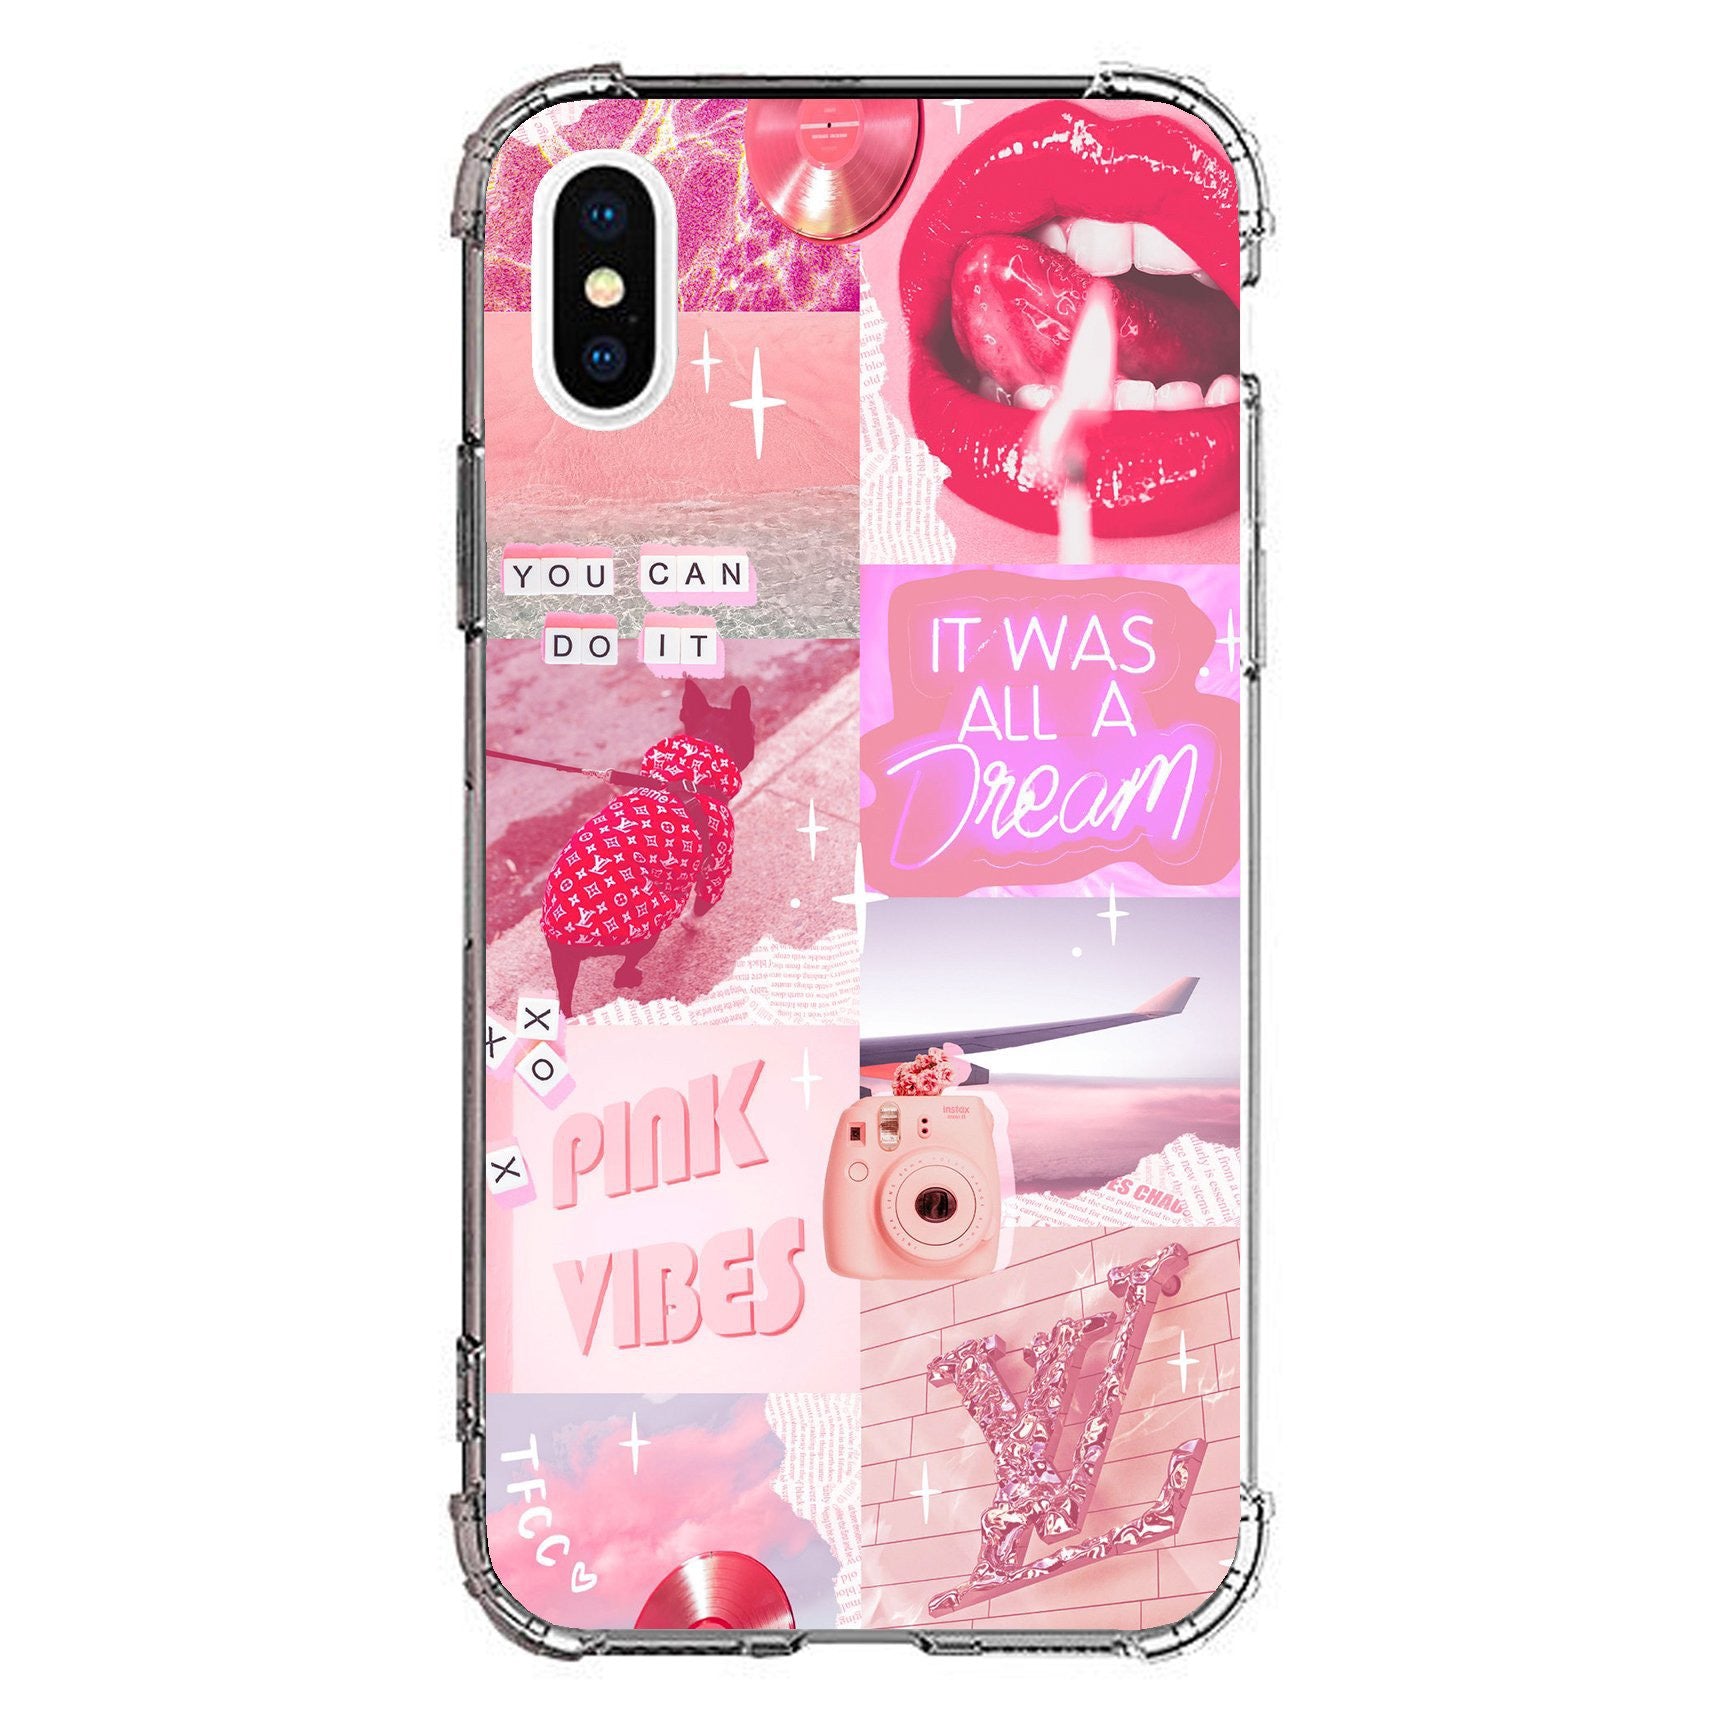 PINK COLLAGE CLEAR CASE - thefonecasecompany